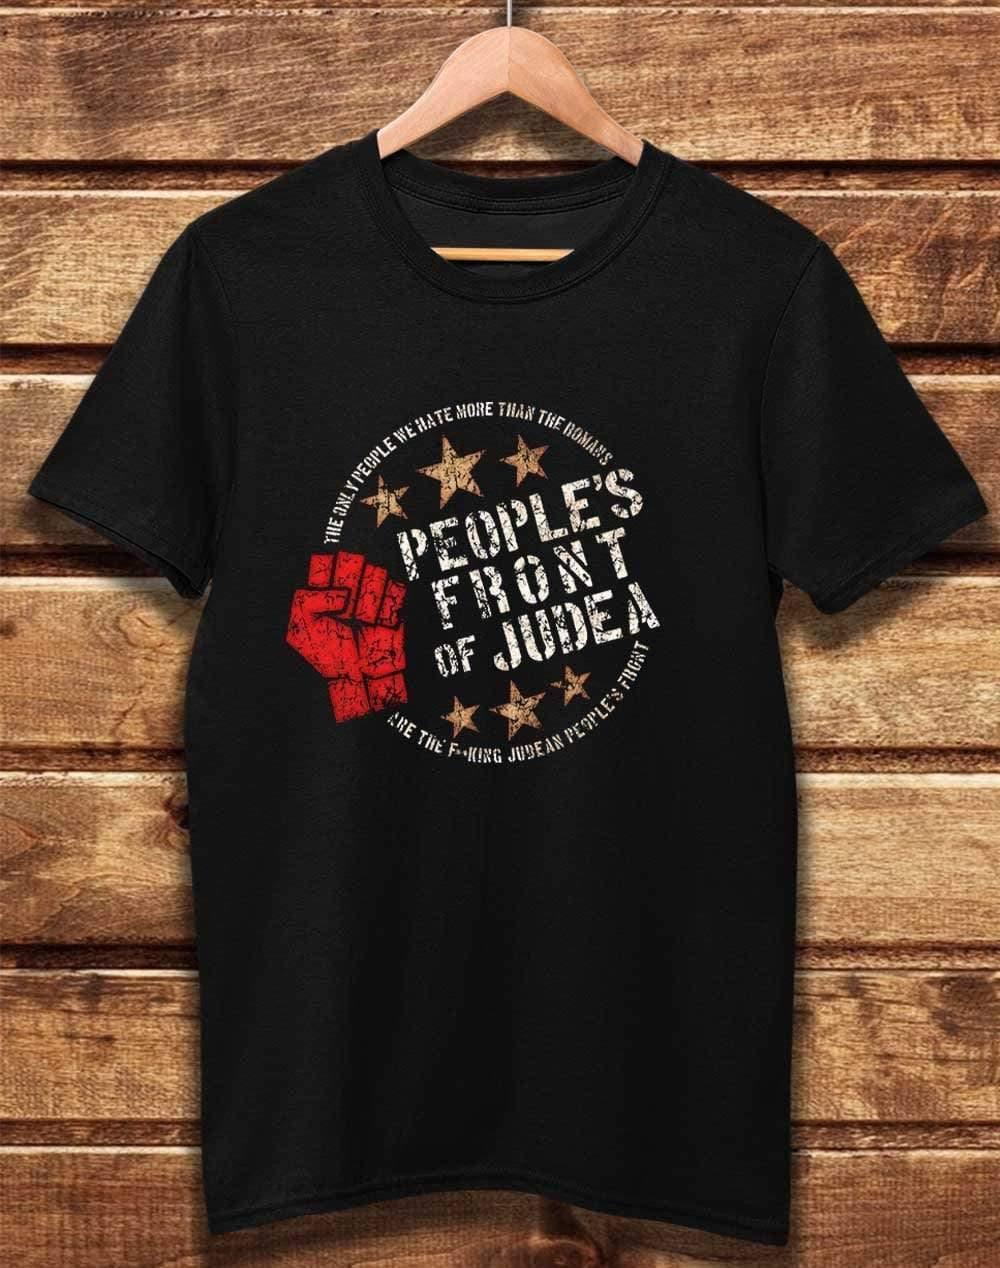 DELUXE People's Front of Judea Organic Cotton T-Shirt XS / Black  - Off World Tees